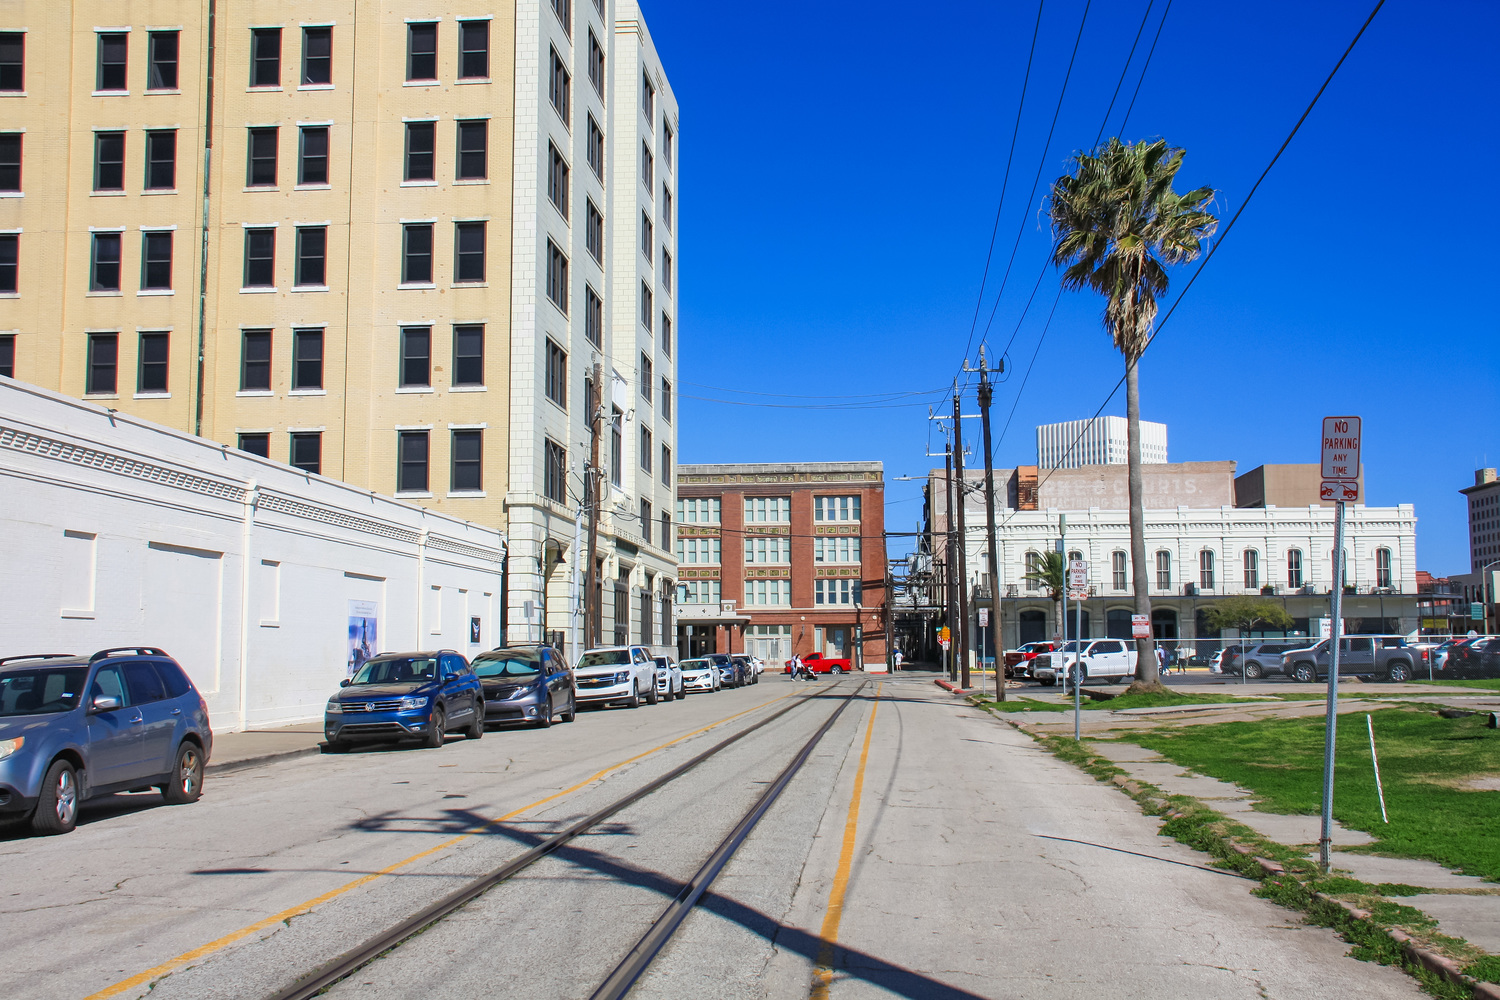 Galveston — Tramway Lines and Infrastructure